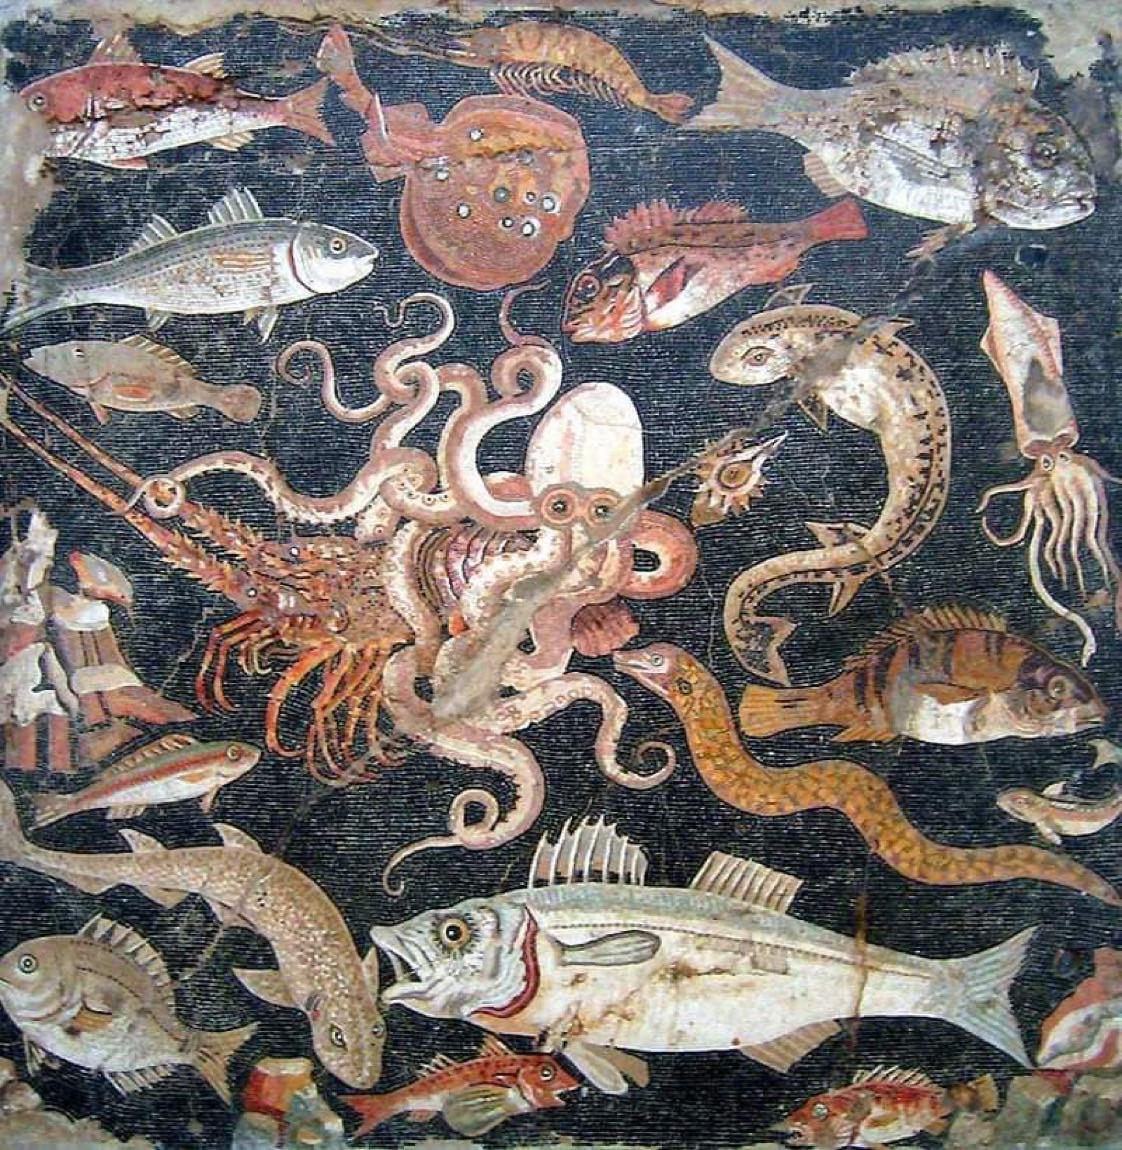 Sea Creatures Mosaic. Originally from the House of the Faun, Pompeii. (180 BC) Now at the National Archaeological Museum, Naples.jpg